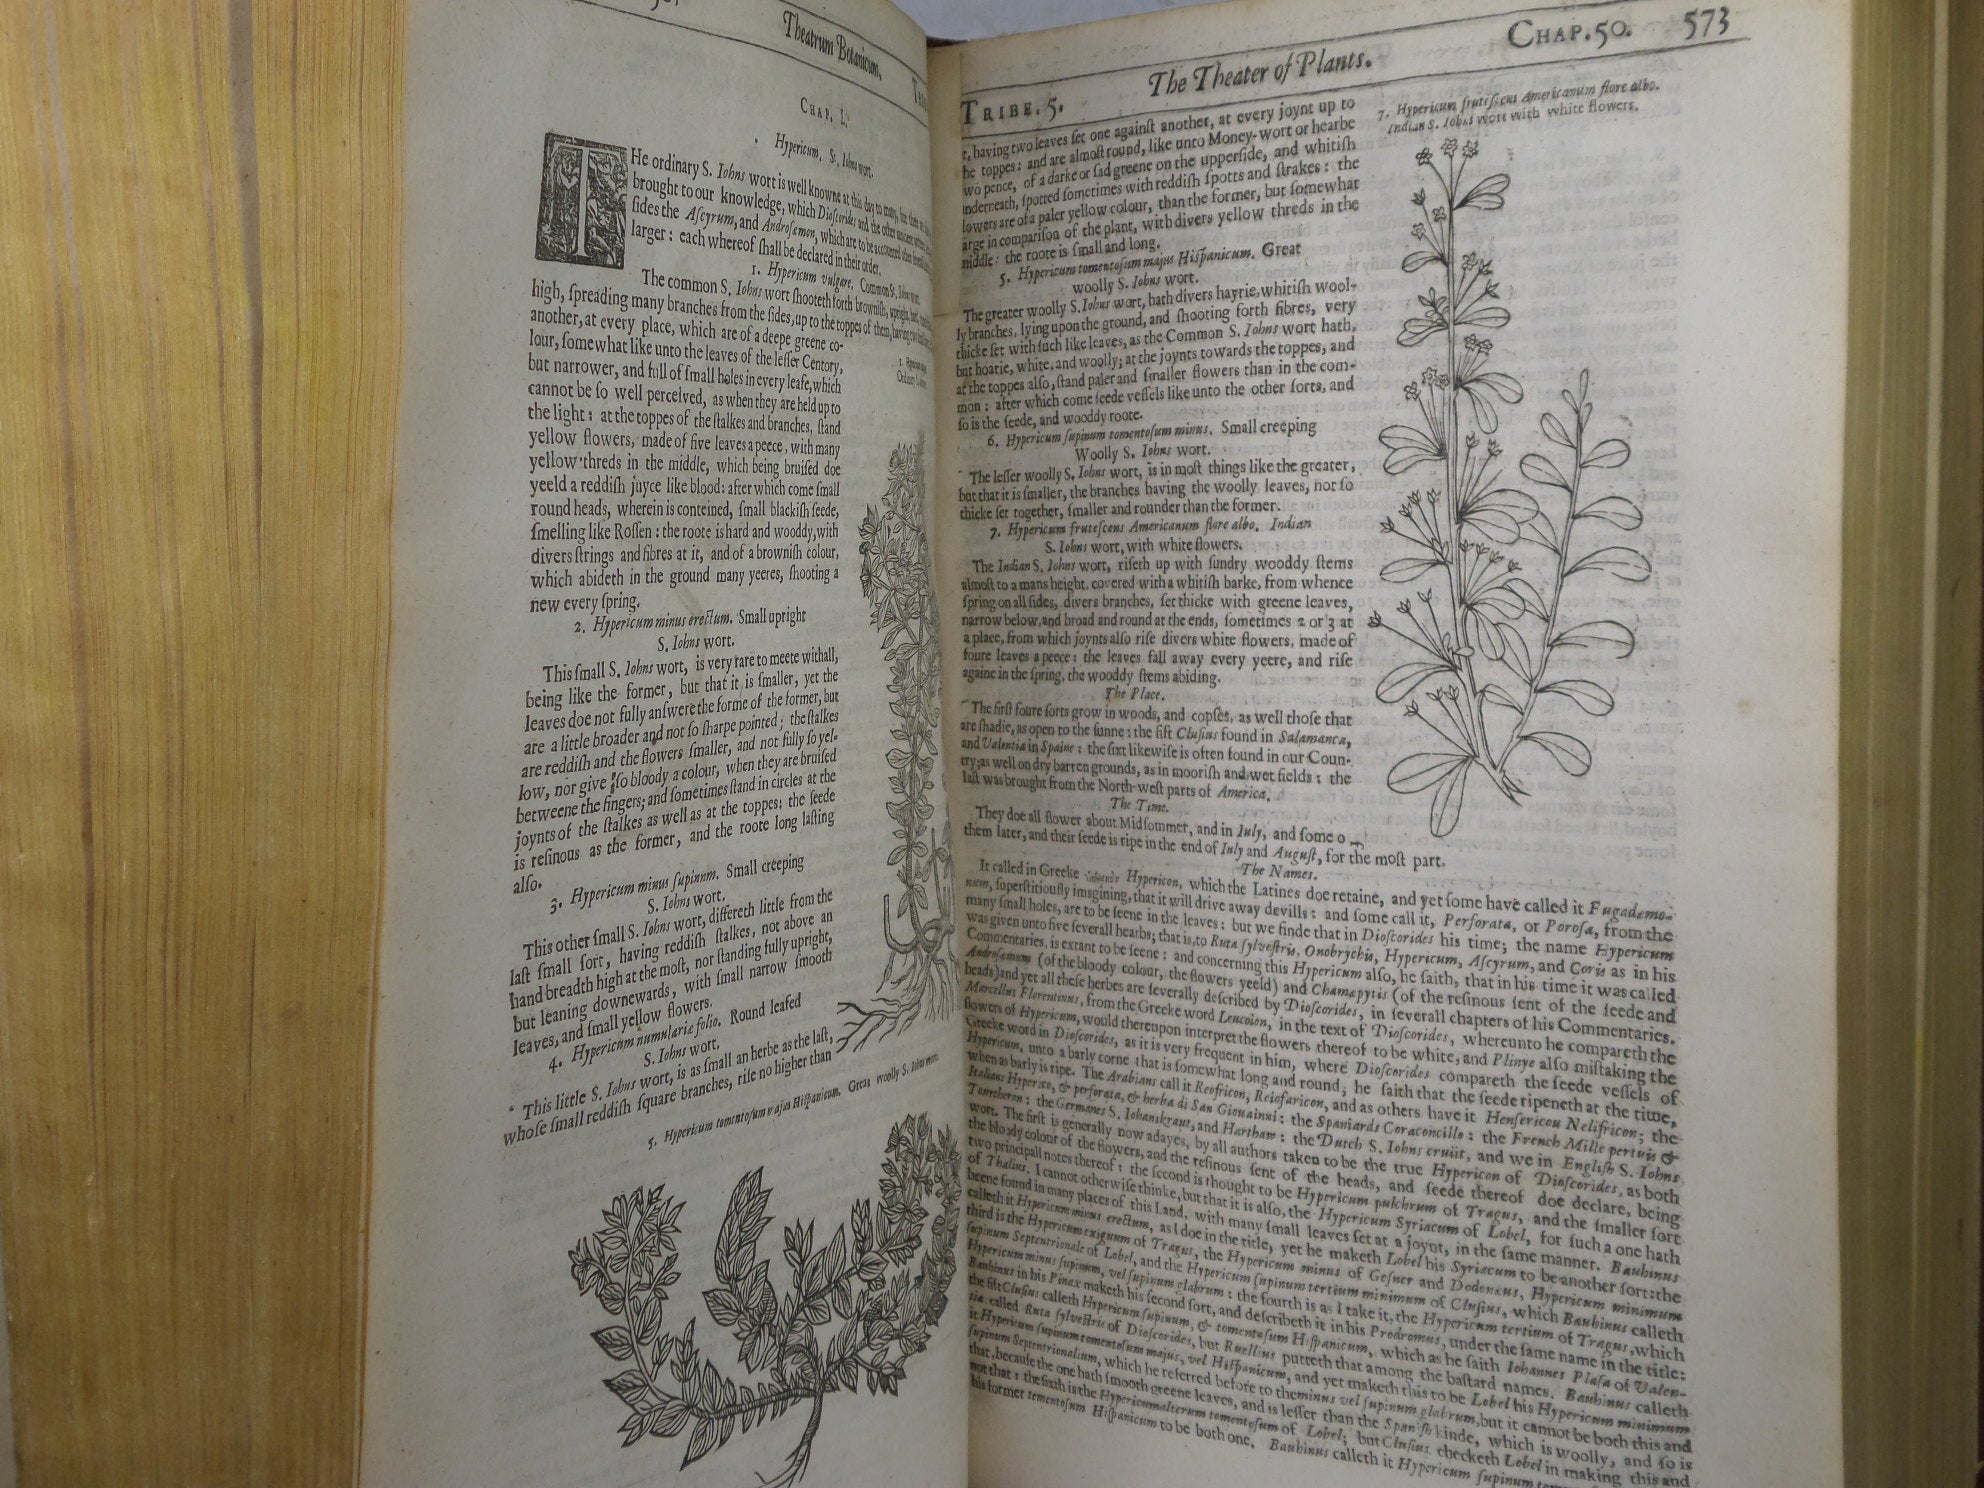 THEATRUM BOTANICUM: THE THEATER OF PLANTS BY JOHN PARKINSON 1640 FIRST EDITION